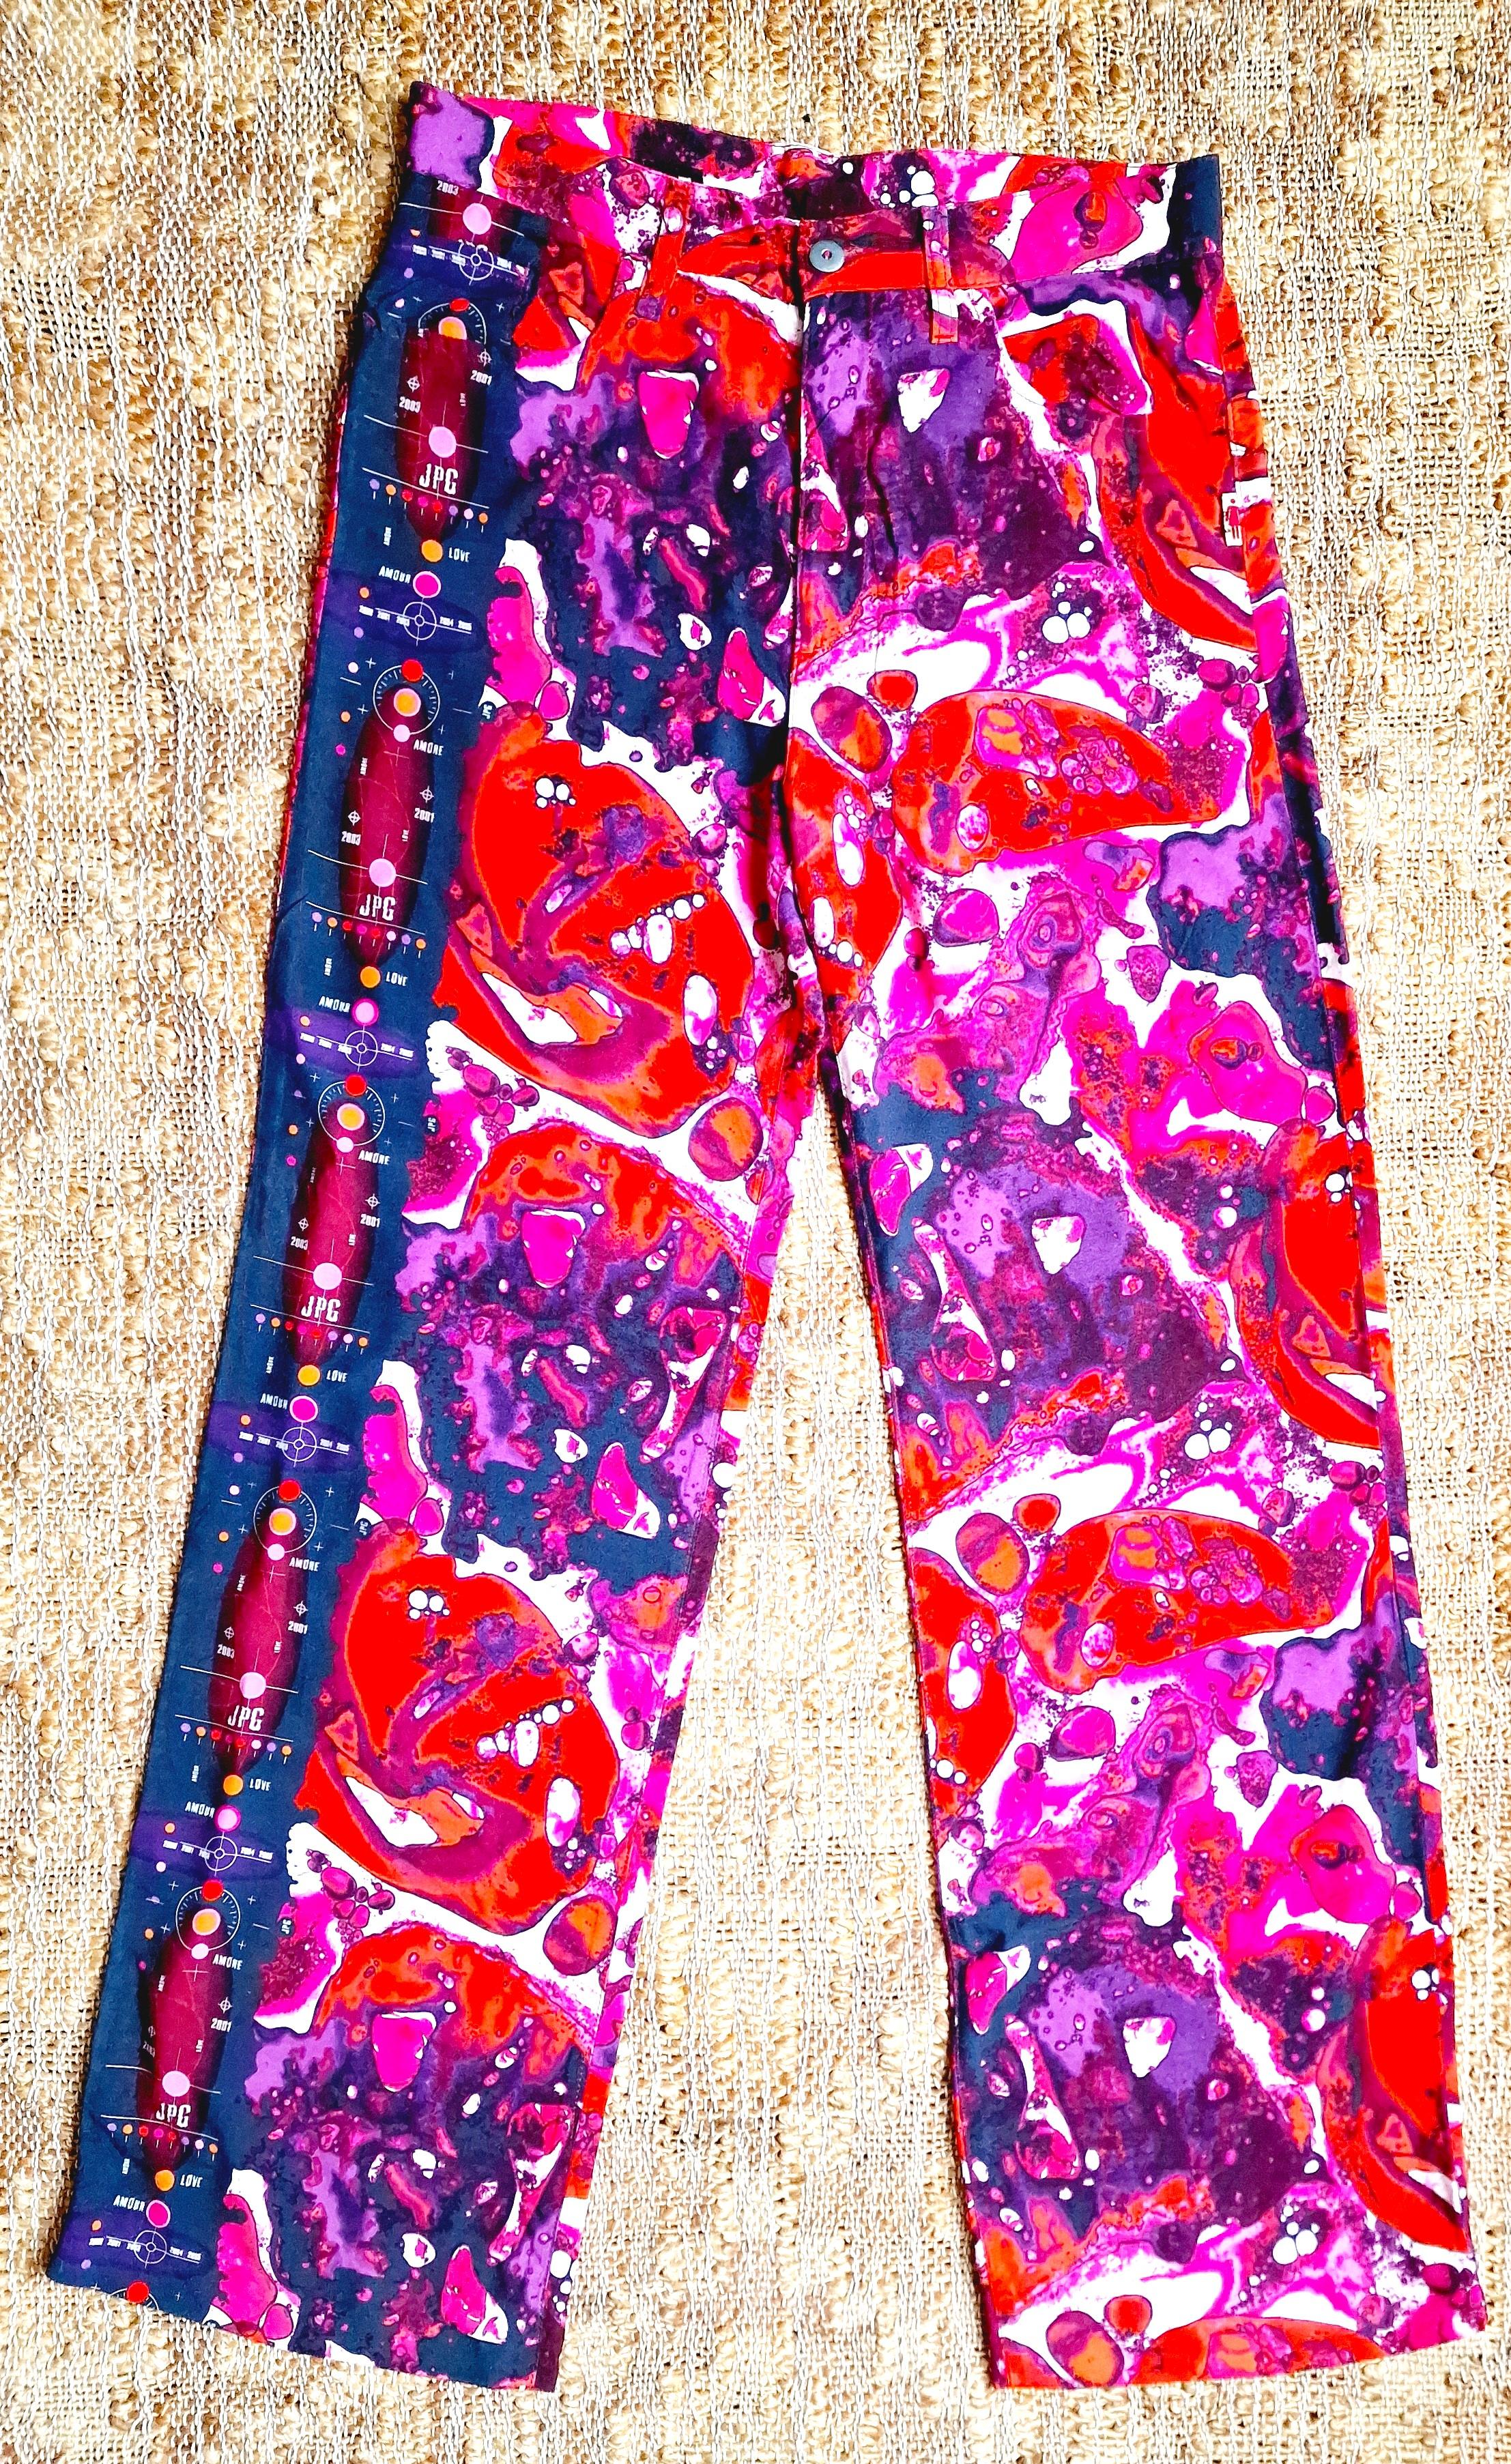 Bacteria pants by JEAN PAUL GAULTIER!
JPG Jean¬s on tha back!
Love, amour, JPG, target and bacteria pattern.
Vibrant colors.

LIKE NEW!

SIZE
Marked size: 28.
Women: fits from bigger medium to smaller large.
Men: small/medium.
Length: 107 cm / 42.1